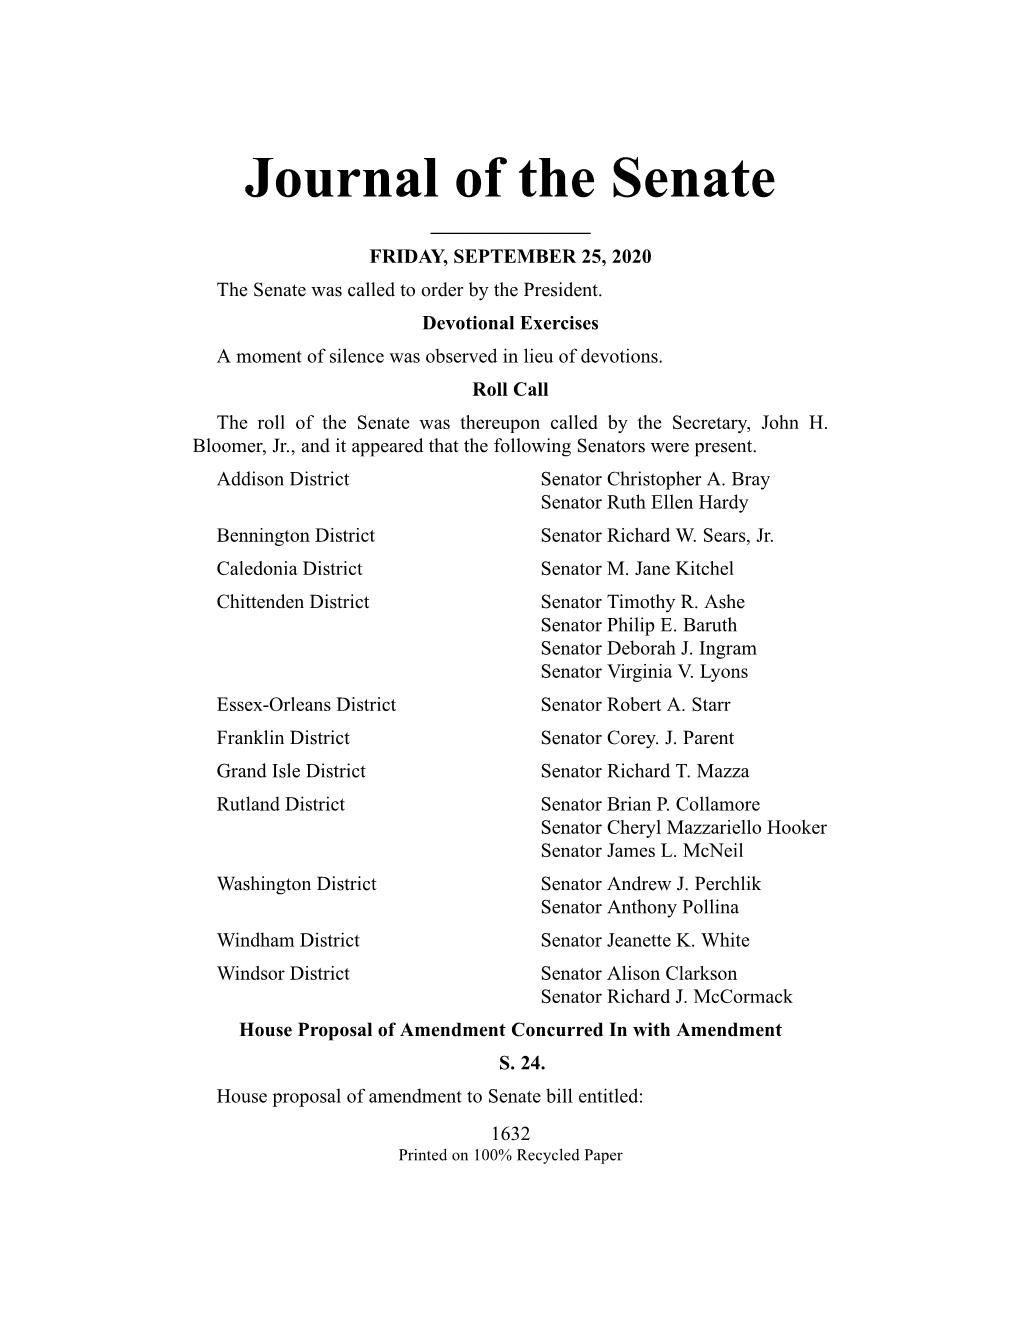 Journal of the Senate ______FRIDAY, SEPTEMBER 25, 2020 the Senate Was Called to Order by the President